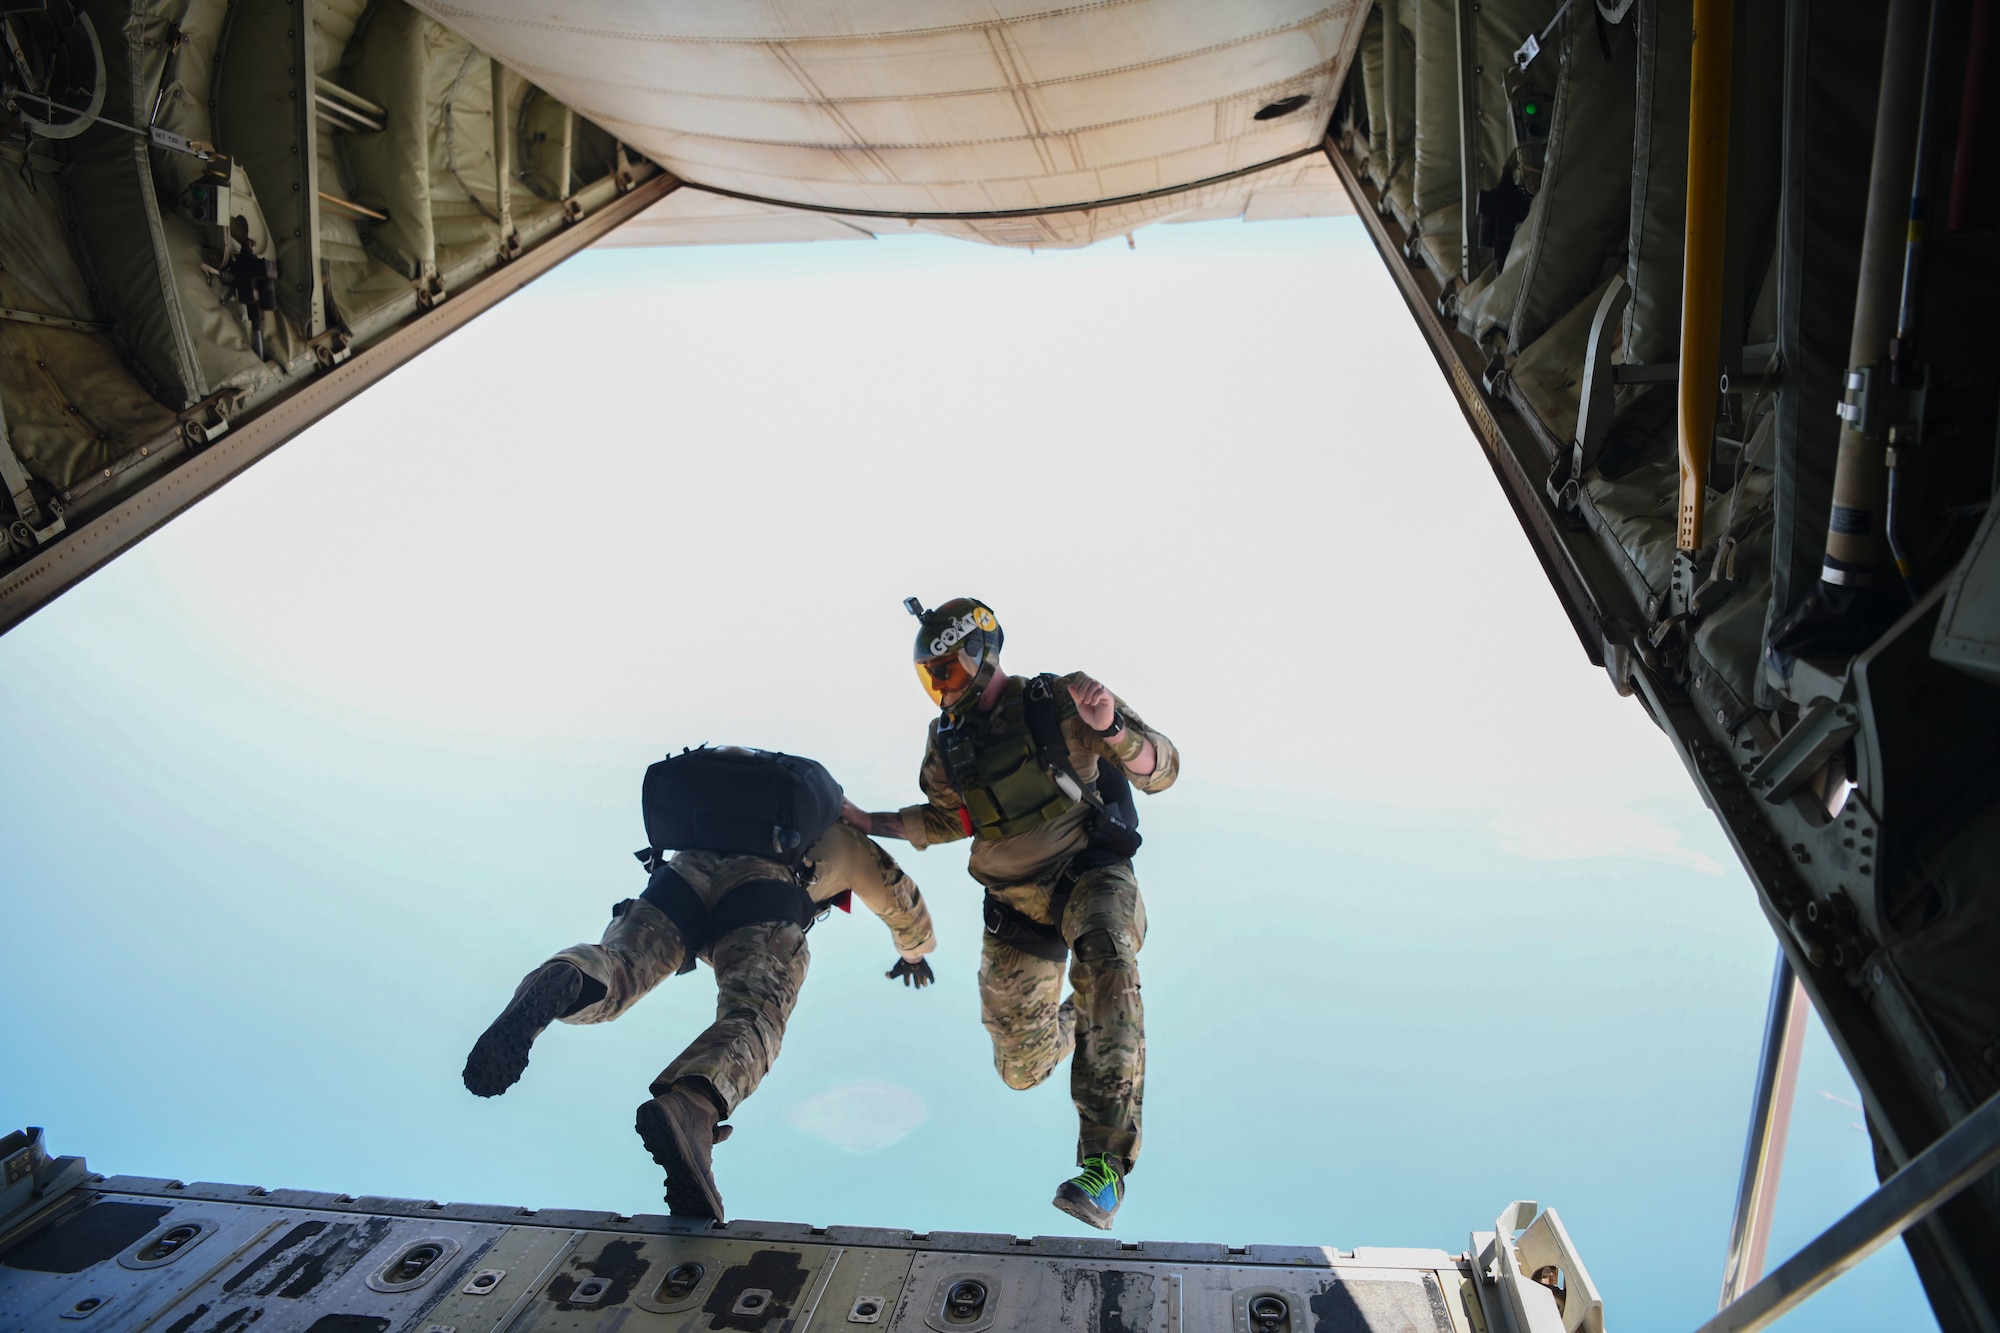 Two U.S. Air Force pararescuemen assigned to the 82nd Expeditionary Rescue Squadron, jump from a U.S. Marine Corps KC-130J Super Hercules over East Africa, Feb. 15, 2021. The 82nd ERQS maintains jump proficiency to provide secure, reliable, flexible combat search, rescue, and recovery capabilities in support of U.S. Africa Command in North and East Africa. (U.S. Air Force photo by Senior Airman Ericka A. Woolever)